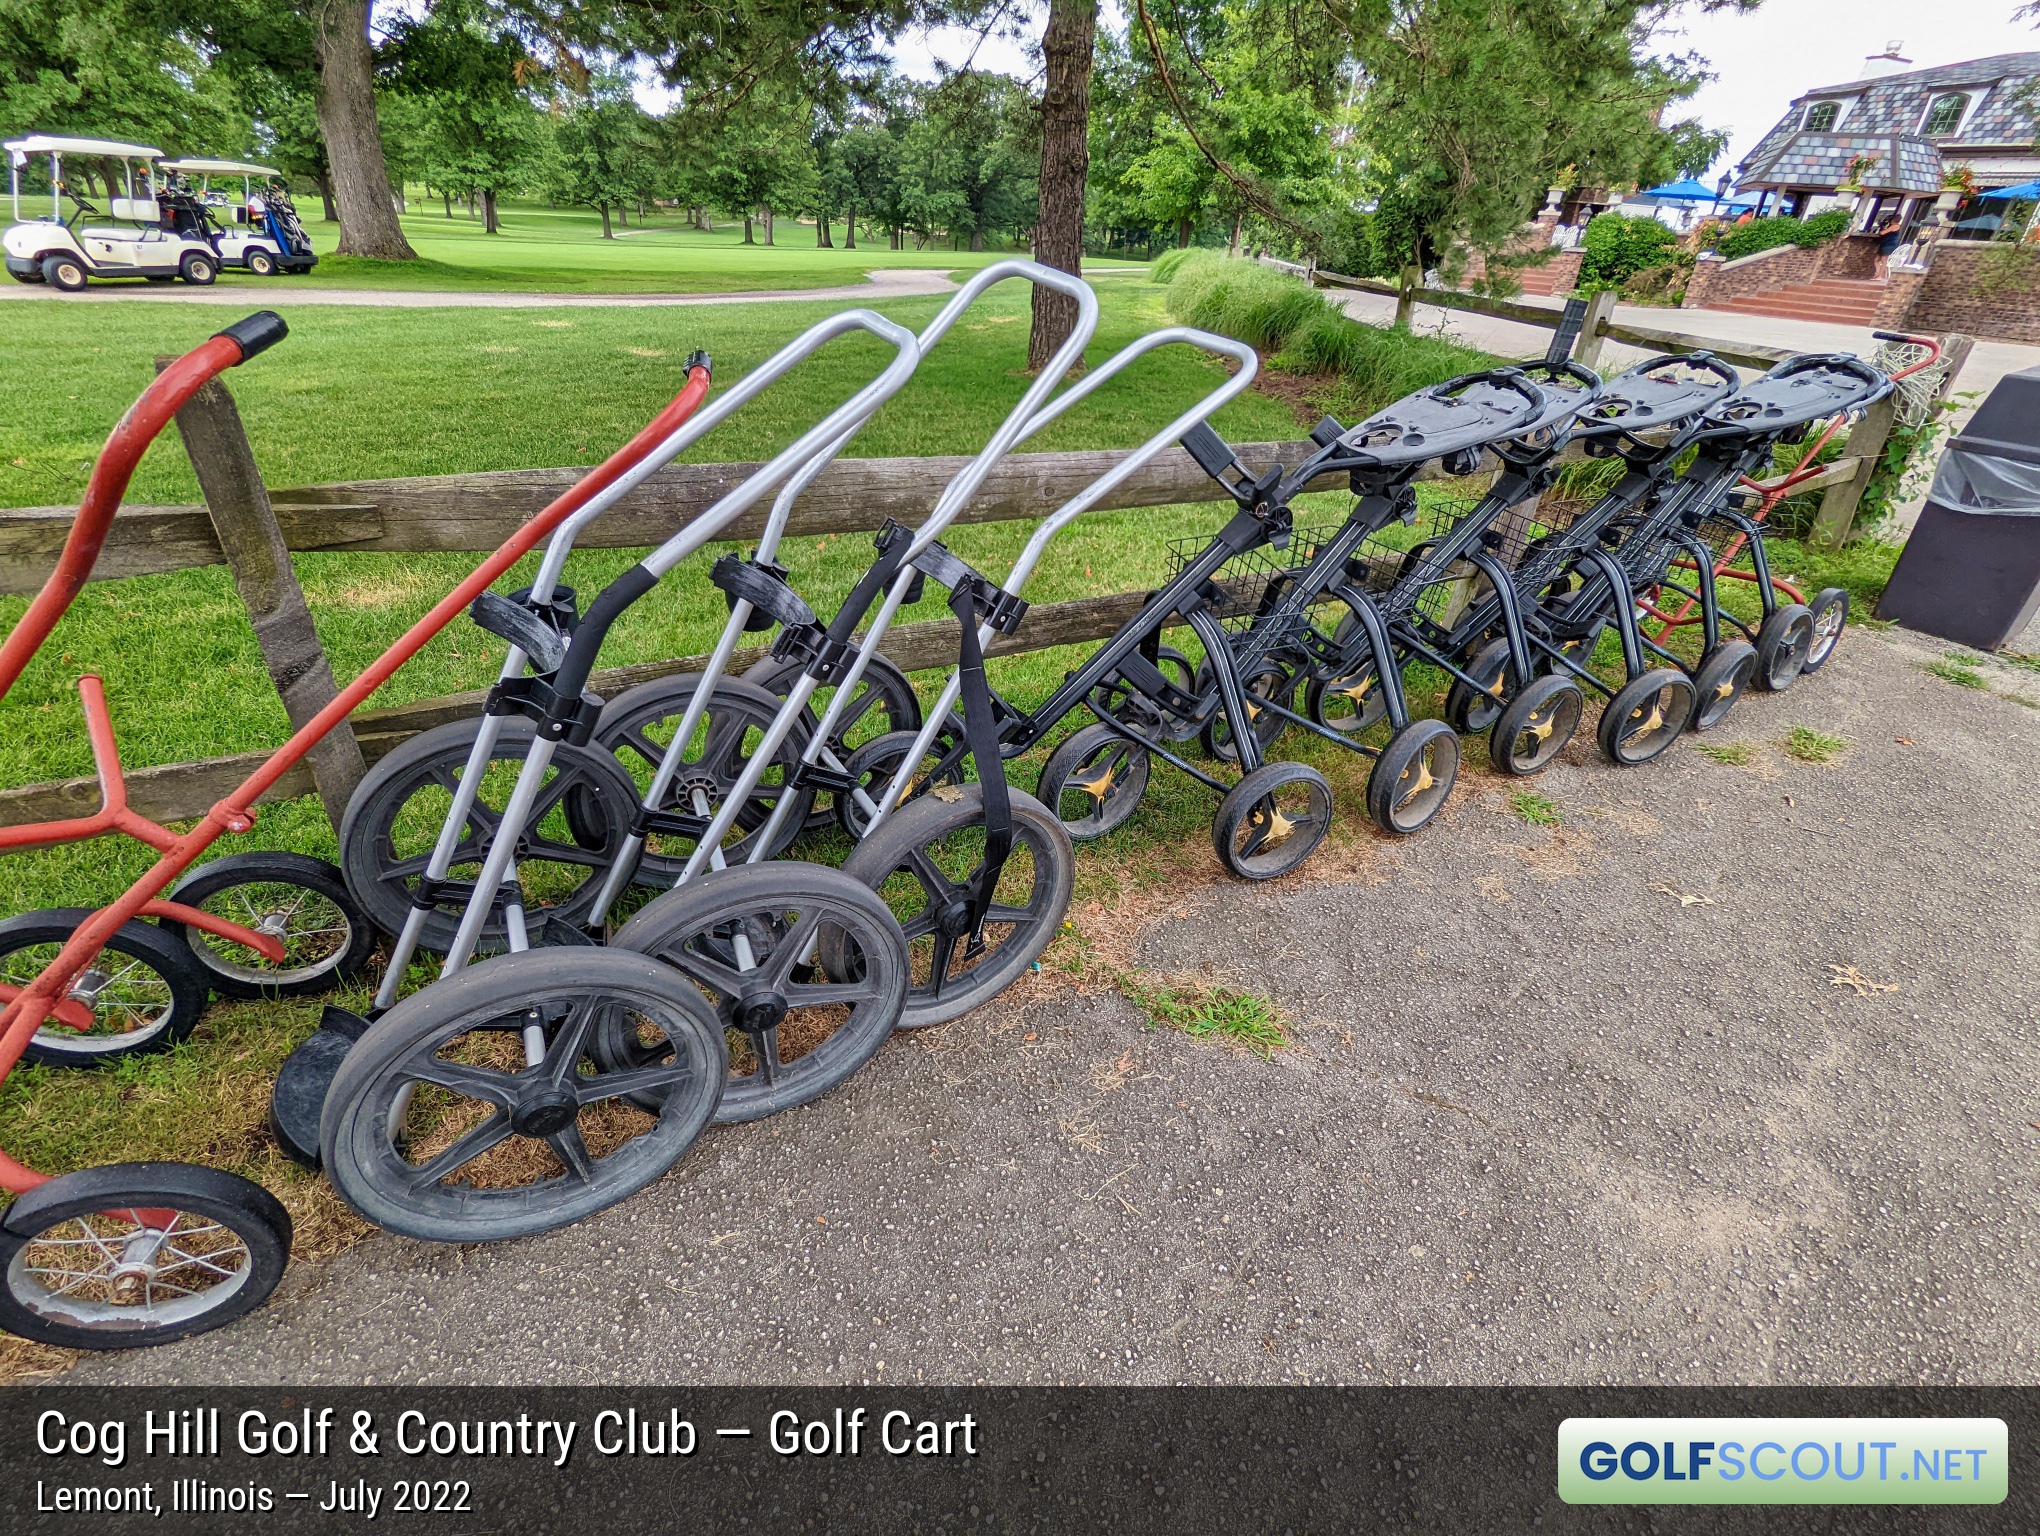 Photo of the golf carts at Cog Hill Course #1 in Lemont, Illinois. Push carts for rent at Cog Hill.